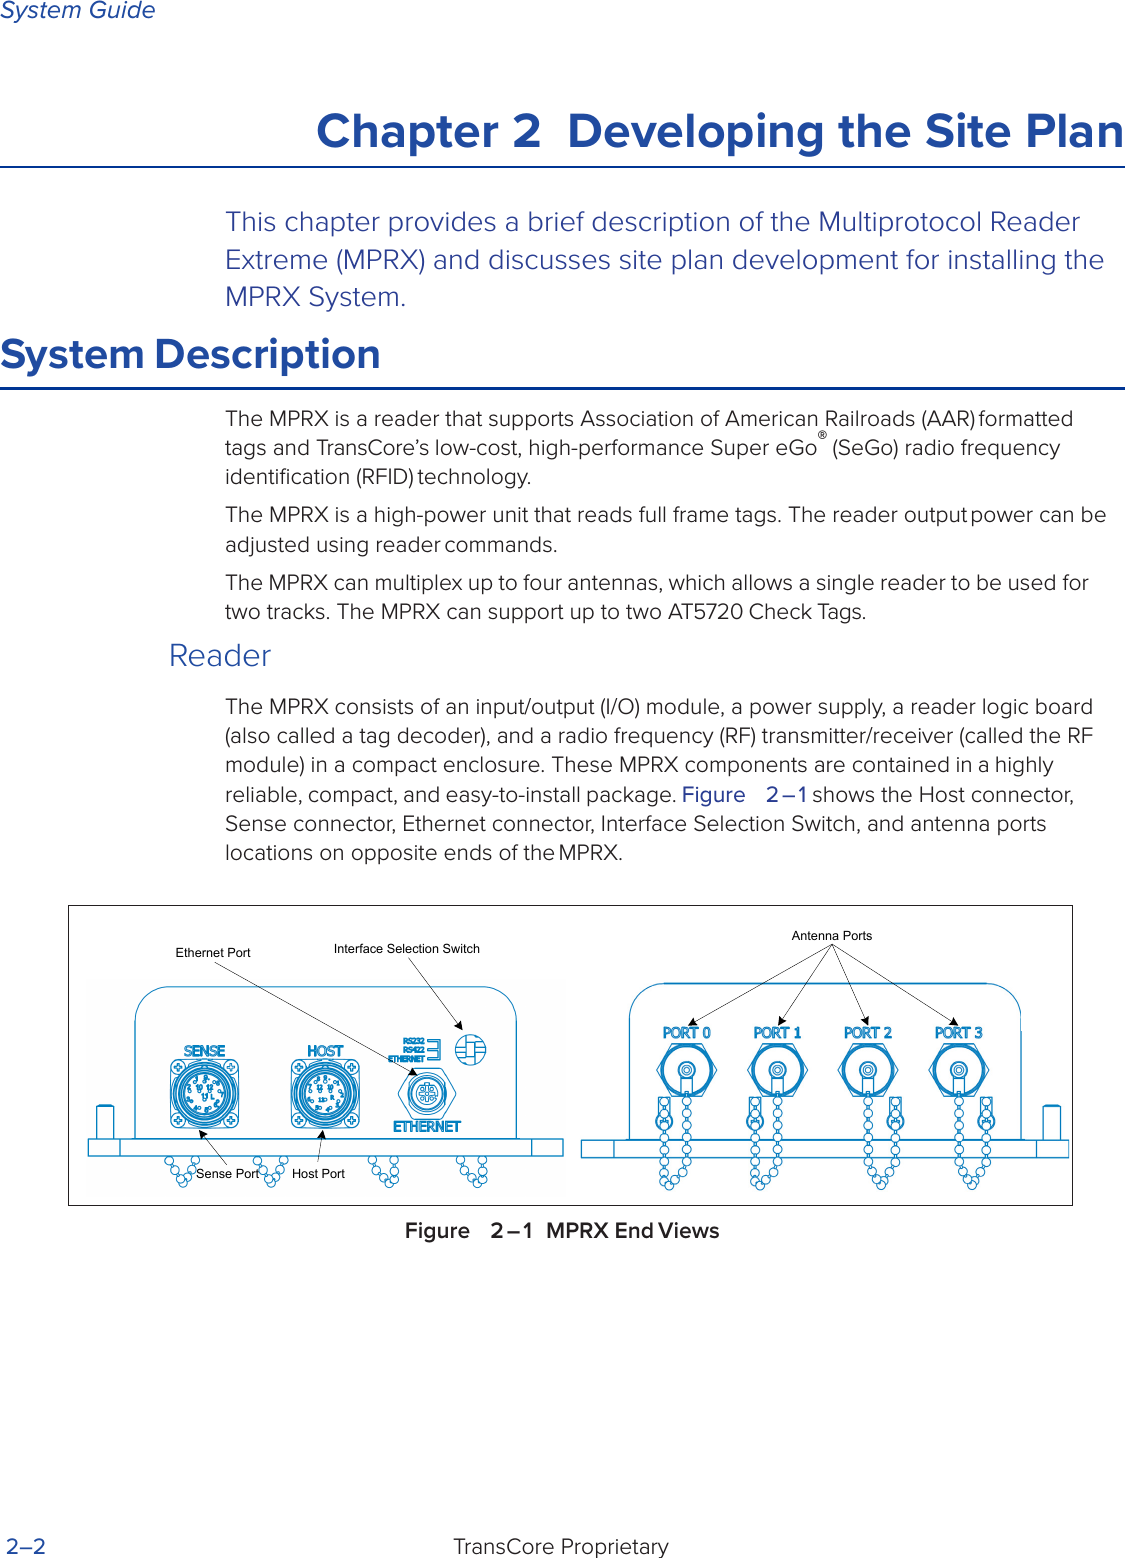 System GuideTransCore Proprietary 2–2Chapter 2  Developing the Site PlanThis chapter provides a brief description of the Multiprotocol Reader Extreme (MPRX) and discusses site plan development for installing the MPRX System.System DescriptionThe MPRX is a reader that supports Association of American Railroads (AAR) formatted tags and TransCore’s low-cost, high-performance Super eGo® (SeGo) radio frequency identiﬁcation (RFID) technology.The MPRX is a high-power unit that reads full frame tags. The reader output power can be adjusted using reader commands.The MPRX can multiplex up to four antennas, which allows a single reader to be used for two tracks. The MPRX can support up to two AT5720 Check Tags.ReaderThe MPRX consists of an input/output (I/O) module, a power supply, a reader logic board (also called a tag decoder), and a radio frequency (RF) transmitter/receiver (called the RF module) in a compact enclosure. These MPRX components are contained in a highly reliable, compact, and easy-to-install package. Figure   2 – 1 shows the Host connector, Sense connector, Ethernet connector, Interface Selection Switch, and antenna ports locations on opposite ends of the MPRX.Figure   2 – 1  MPRX End ViewsAntenna PortsInterface Selection SwitchHost PortSense PortEthernet Port